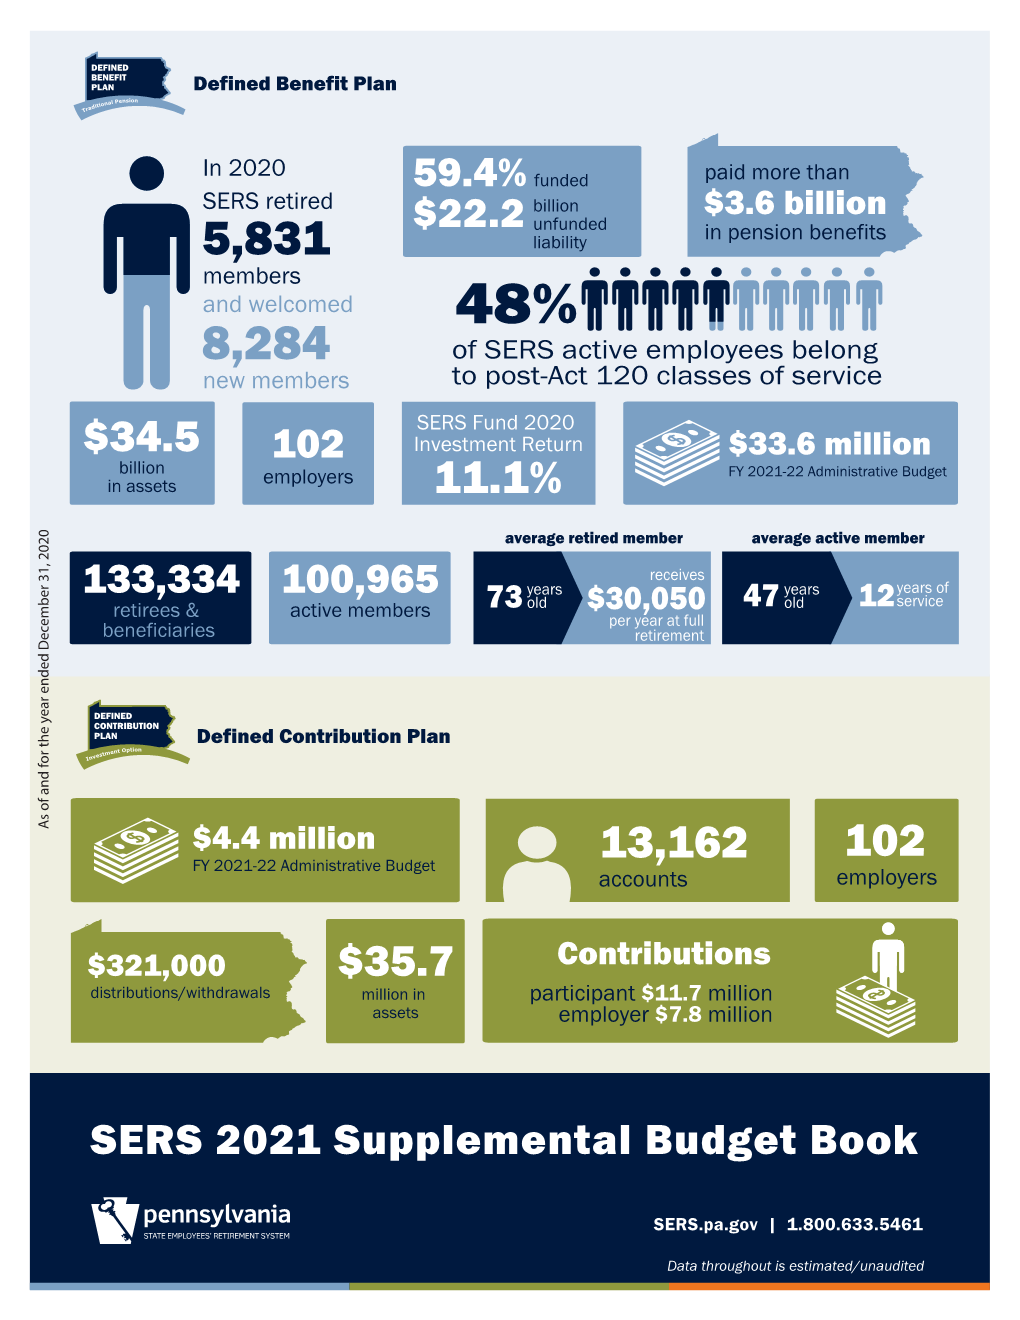 SERS 2021 Supplemental Budget Book Released